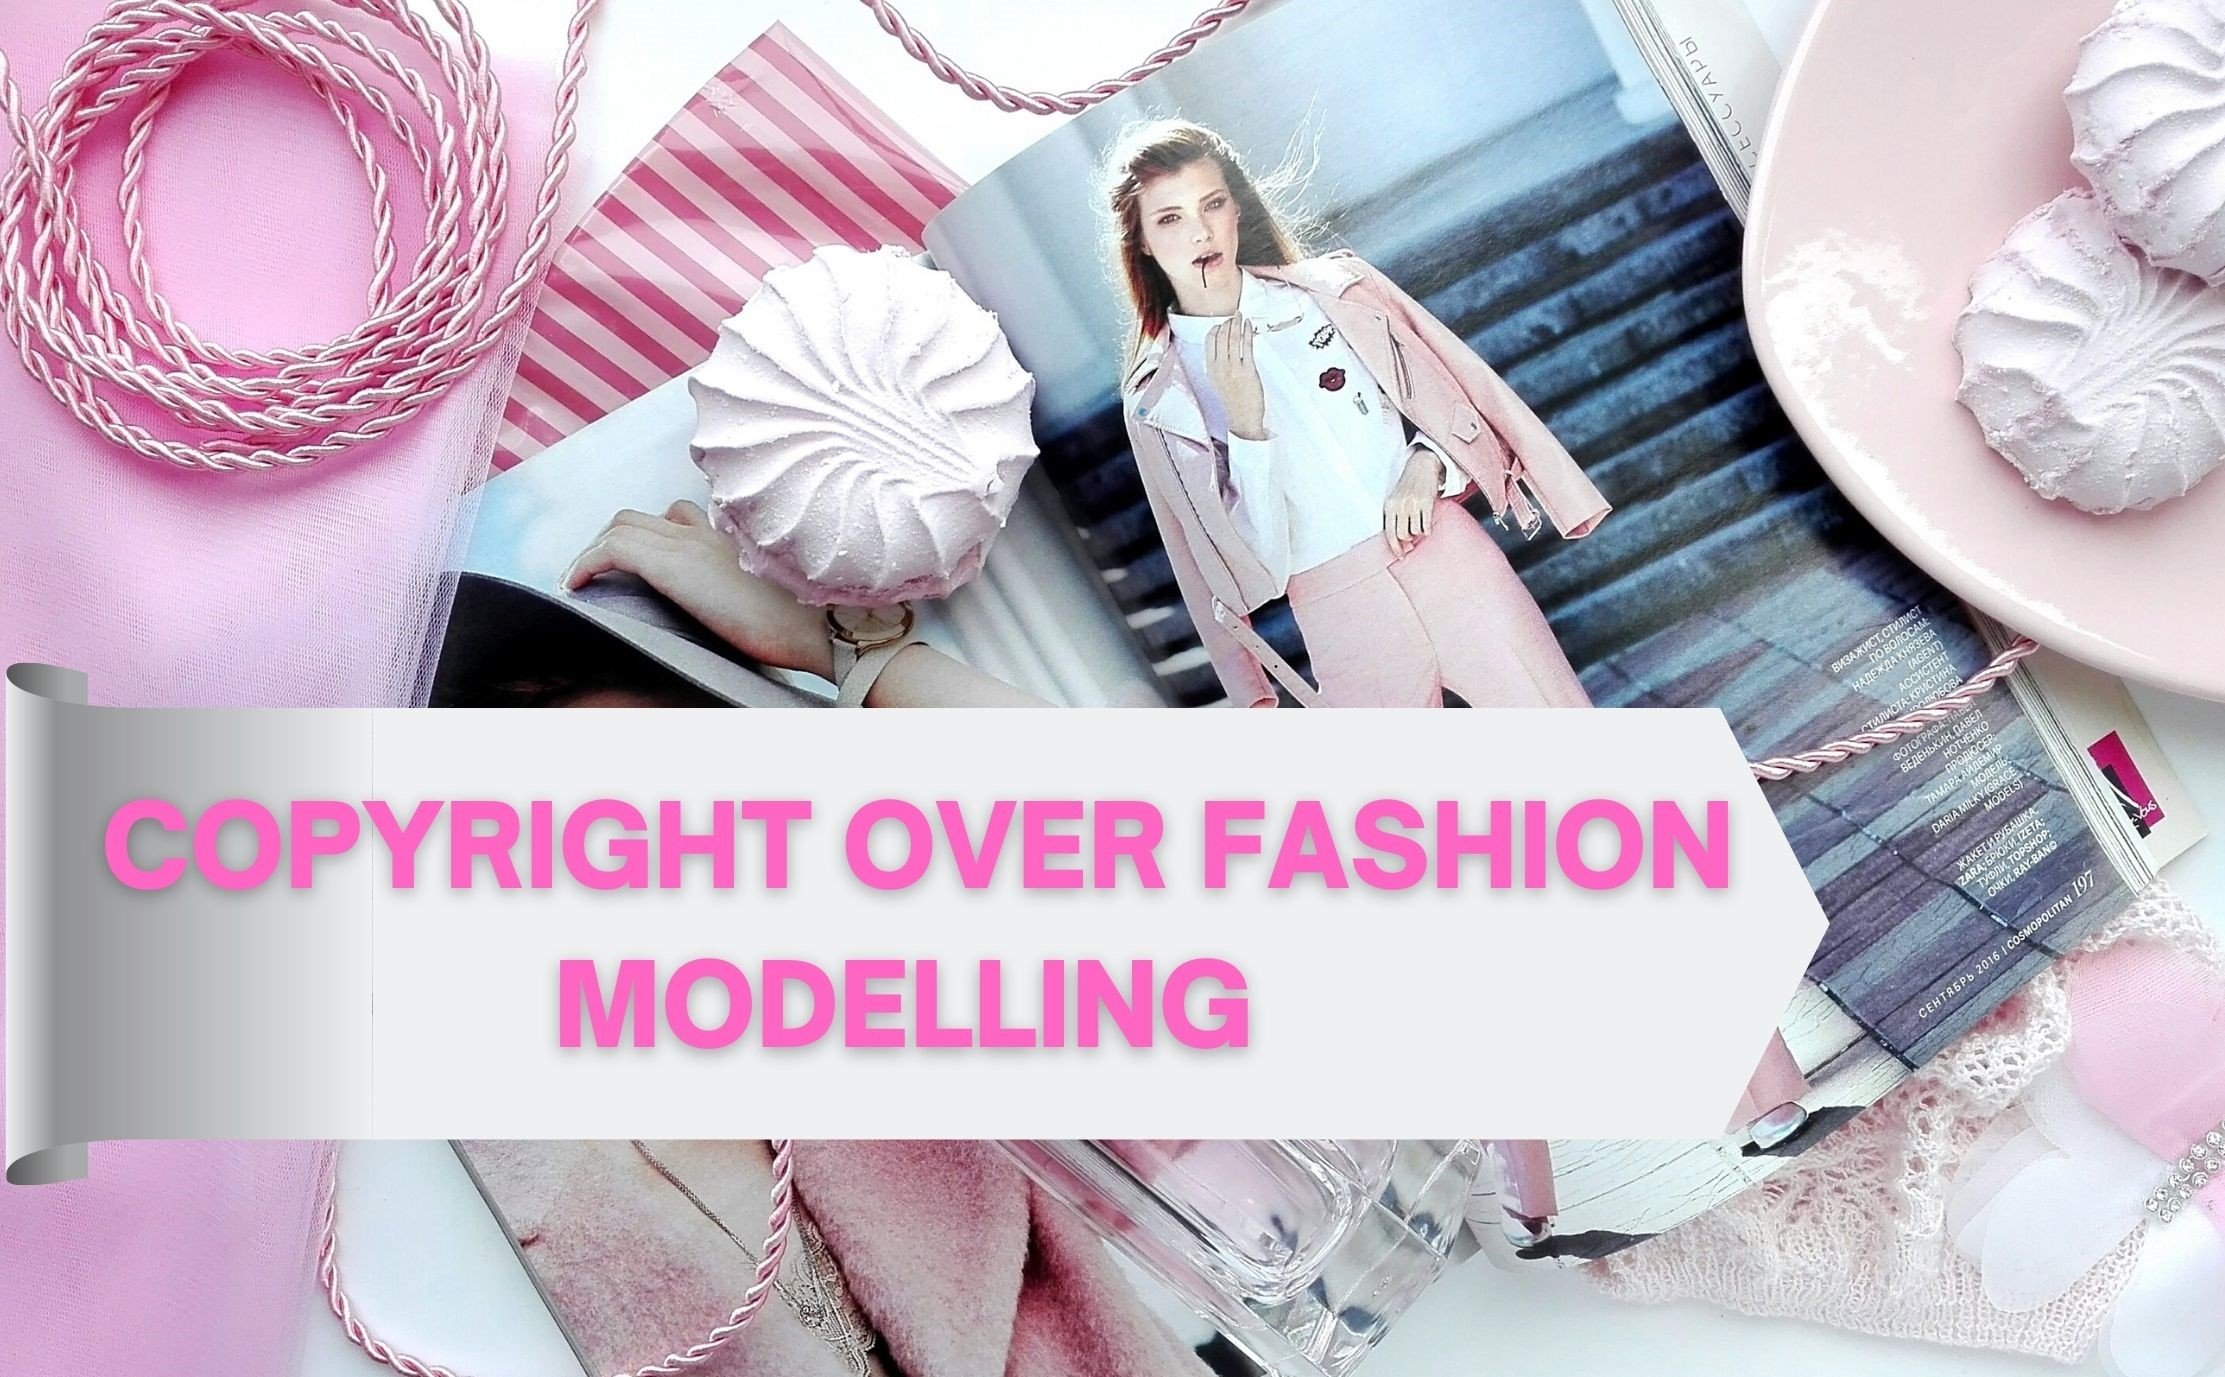 COPYRIGHT OVER FASHION MODELLING